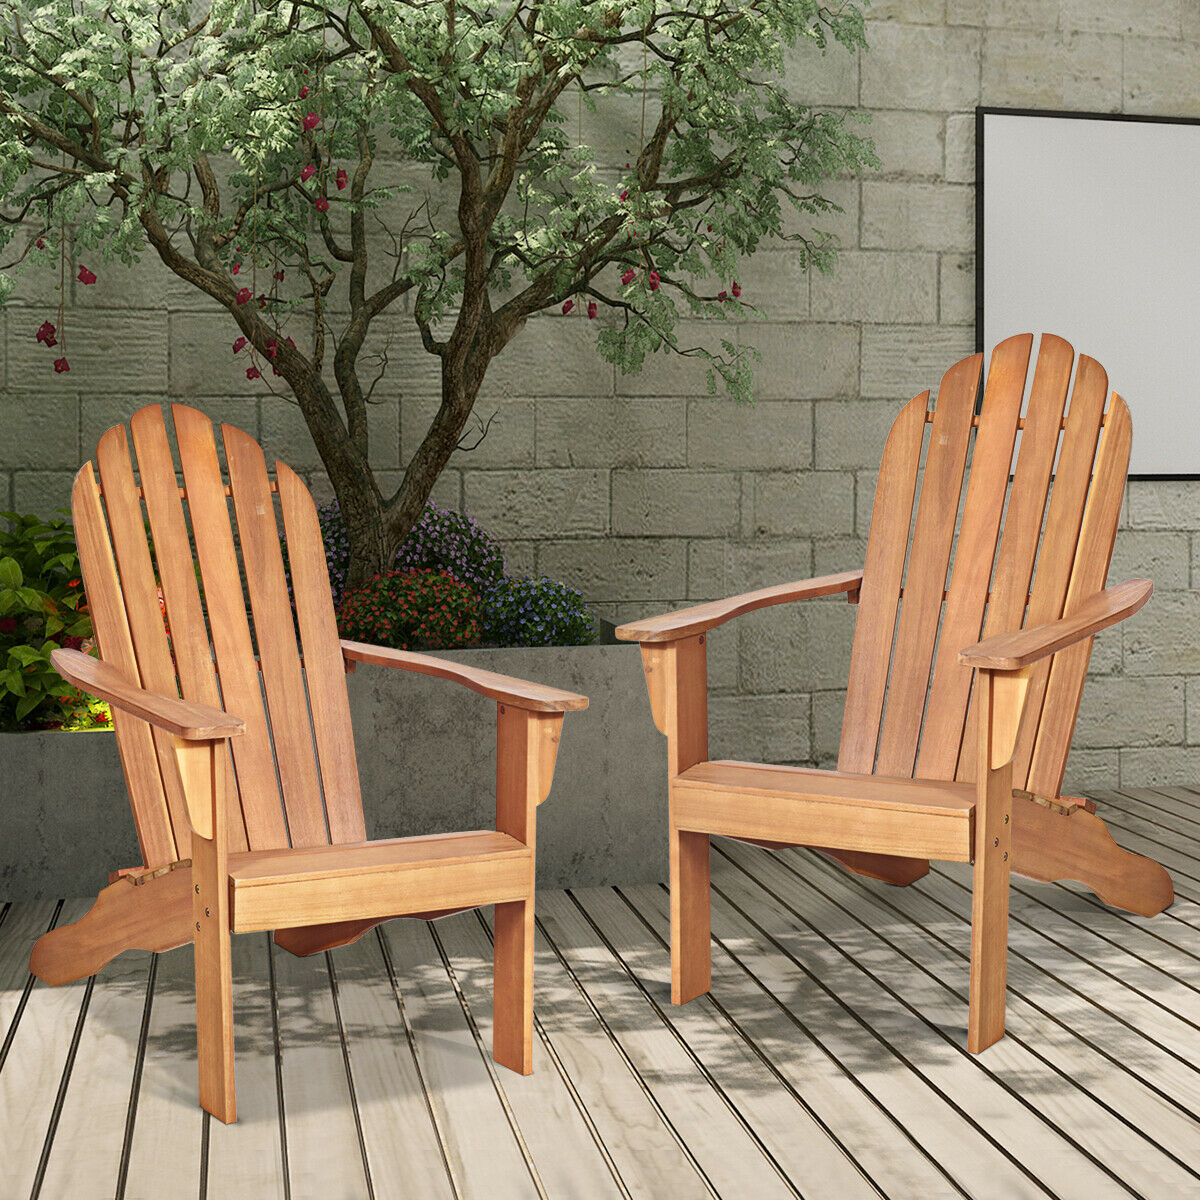 2PCS Wooden Classic Adirondack Chair Lounge Chair Outdoor Patio Natural